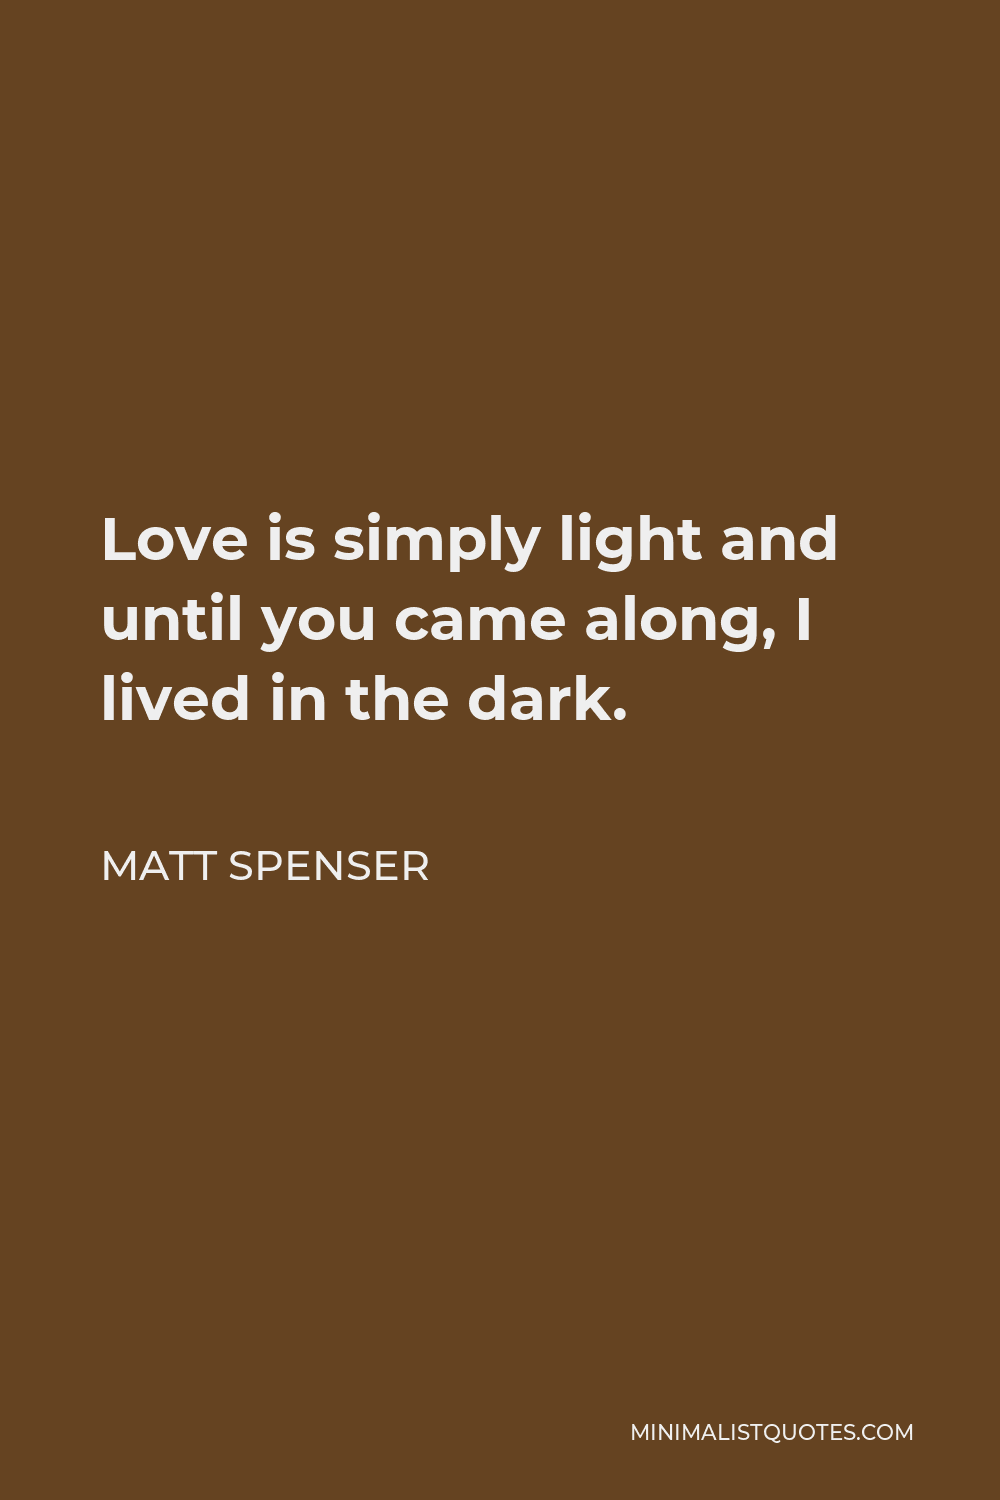 Matt Spenser Quote - Love is simply light and until you came along, I lived in the dark.